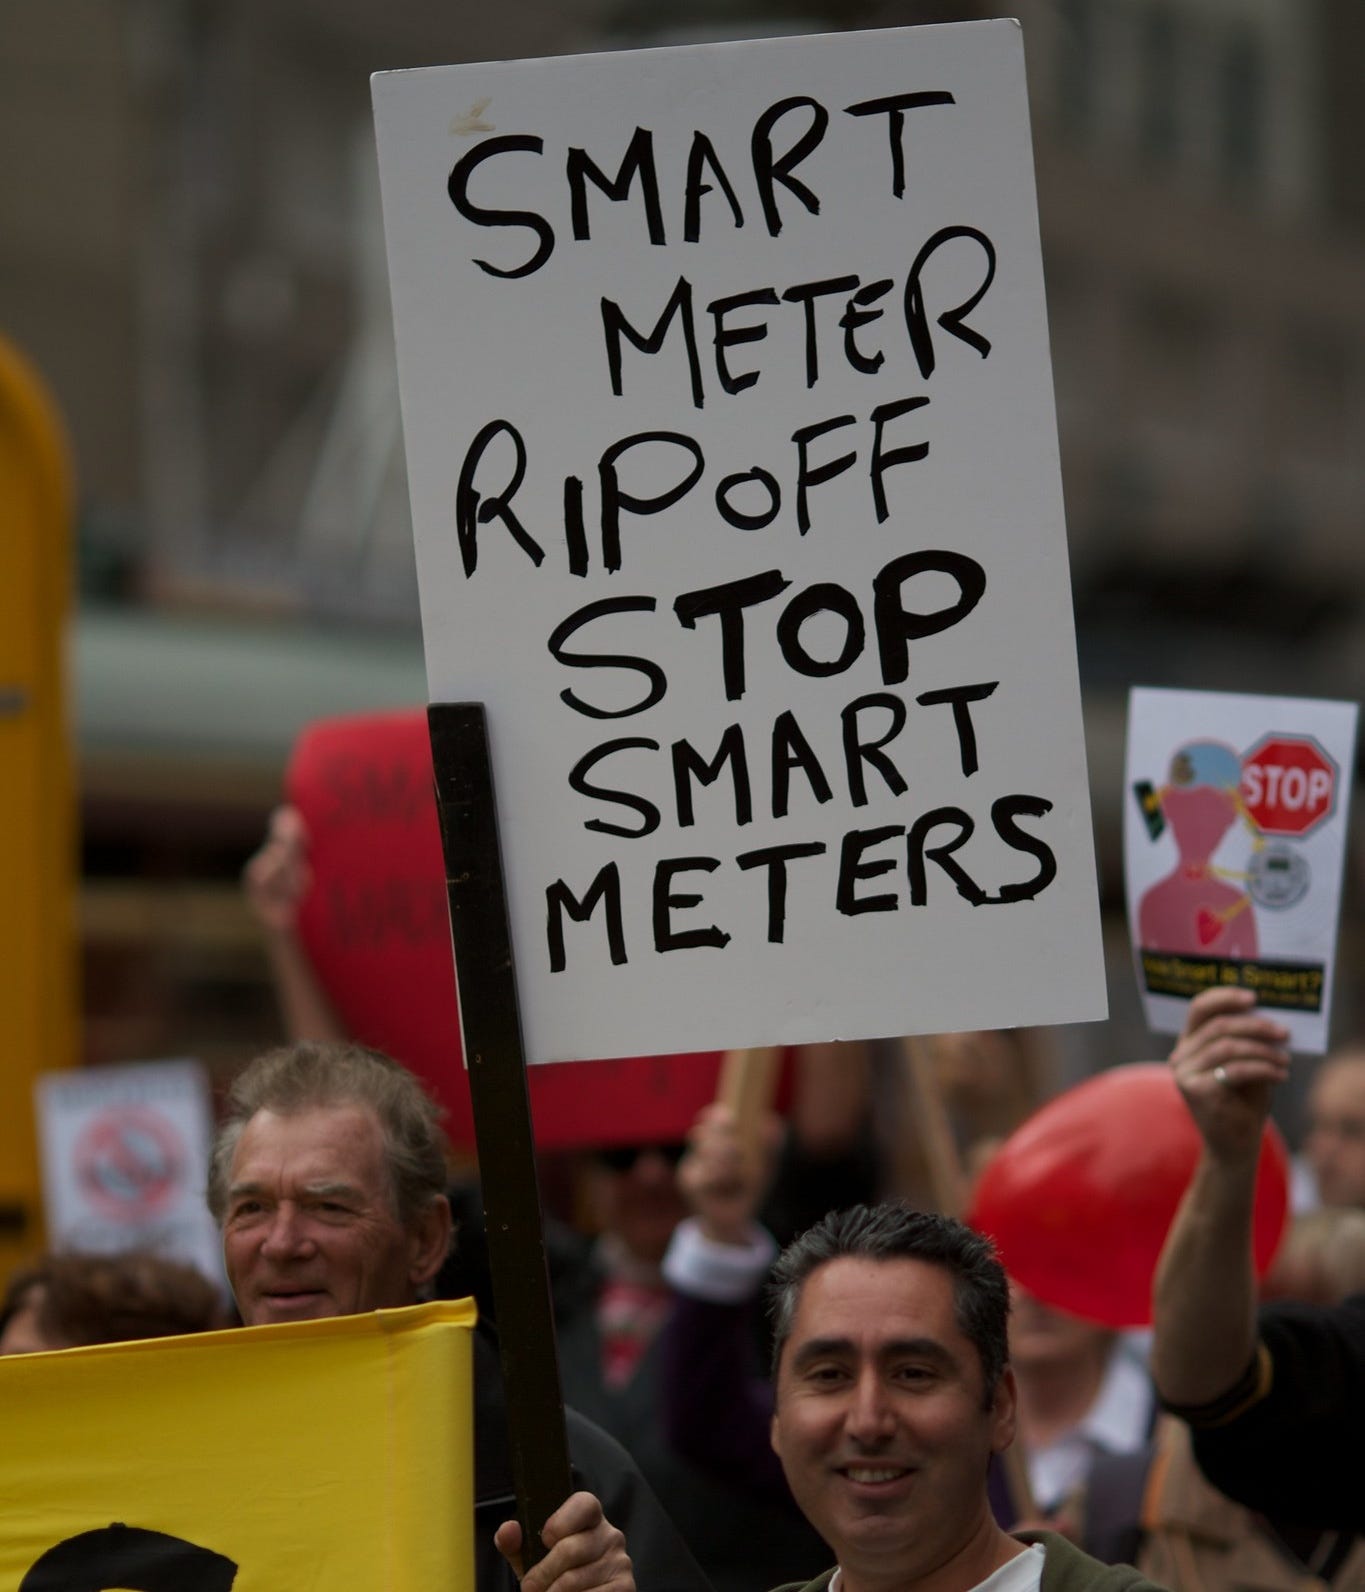 Smart meter ripoff, stop smart meters sign at protest